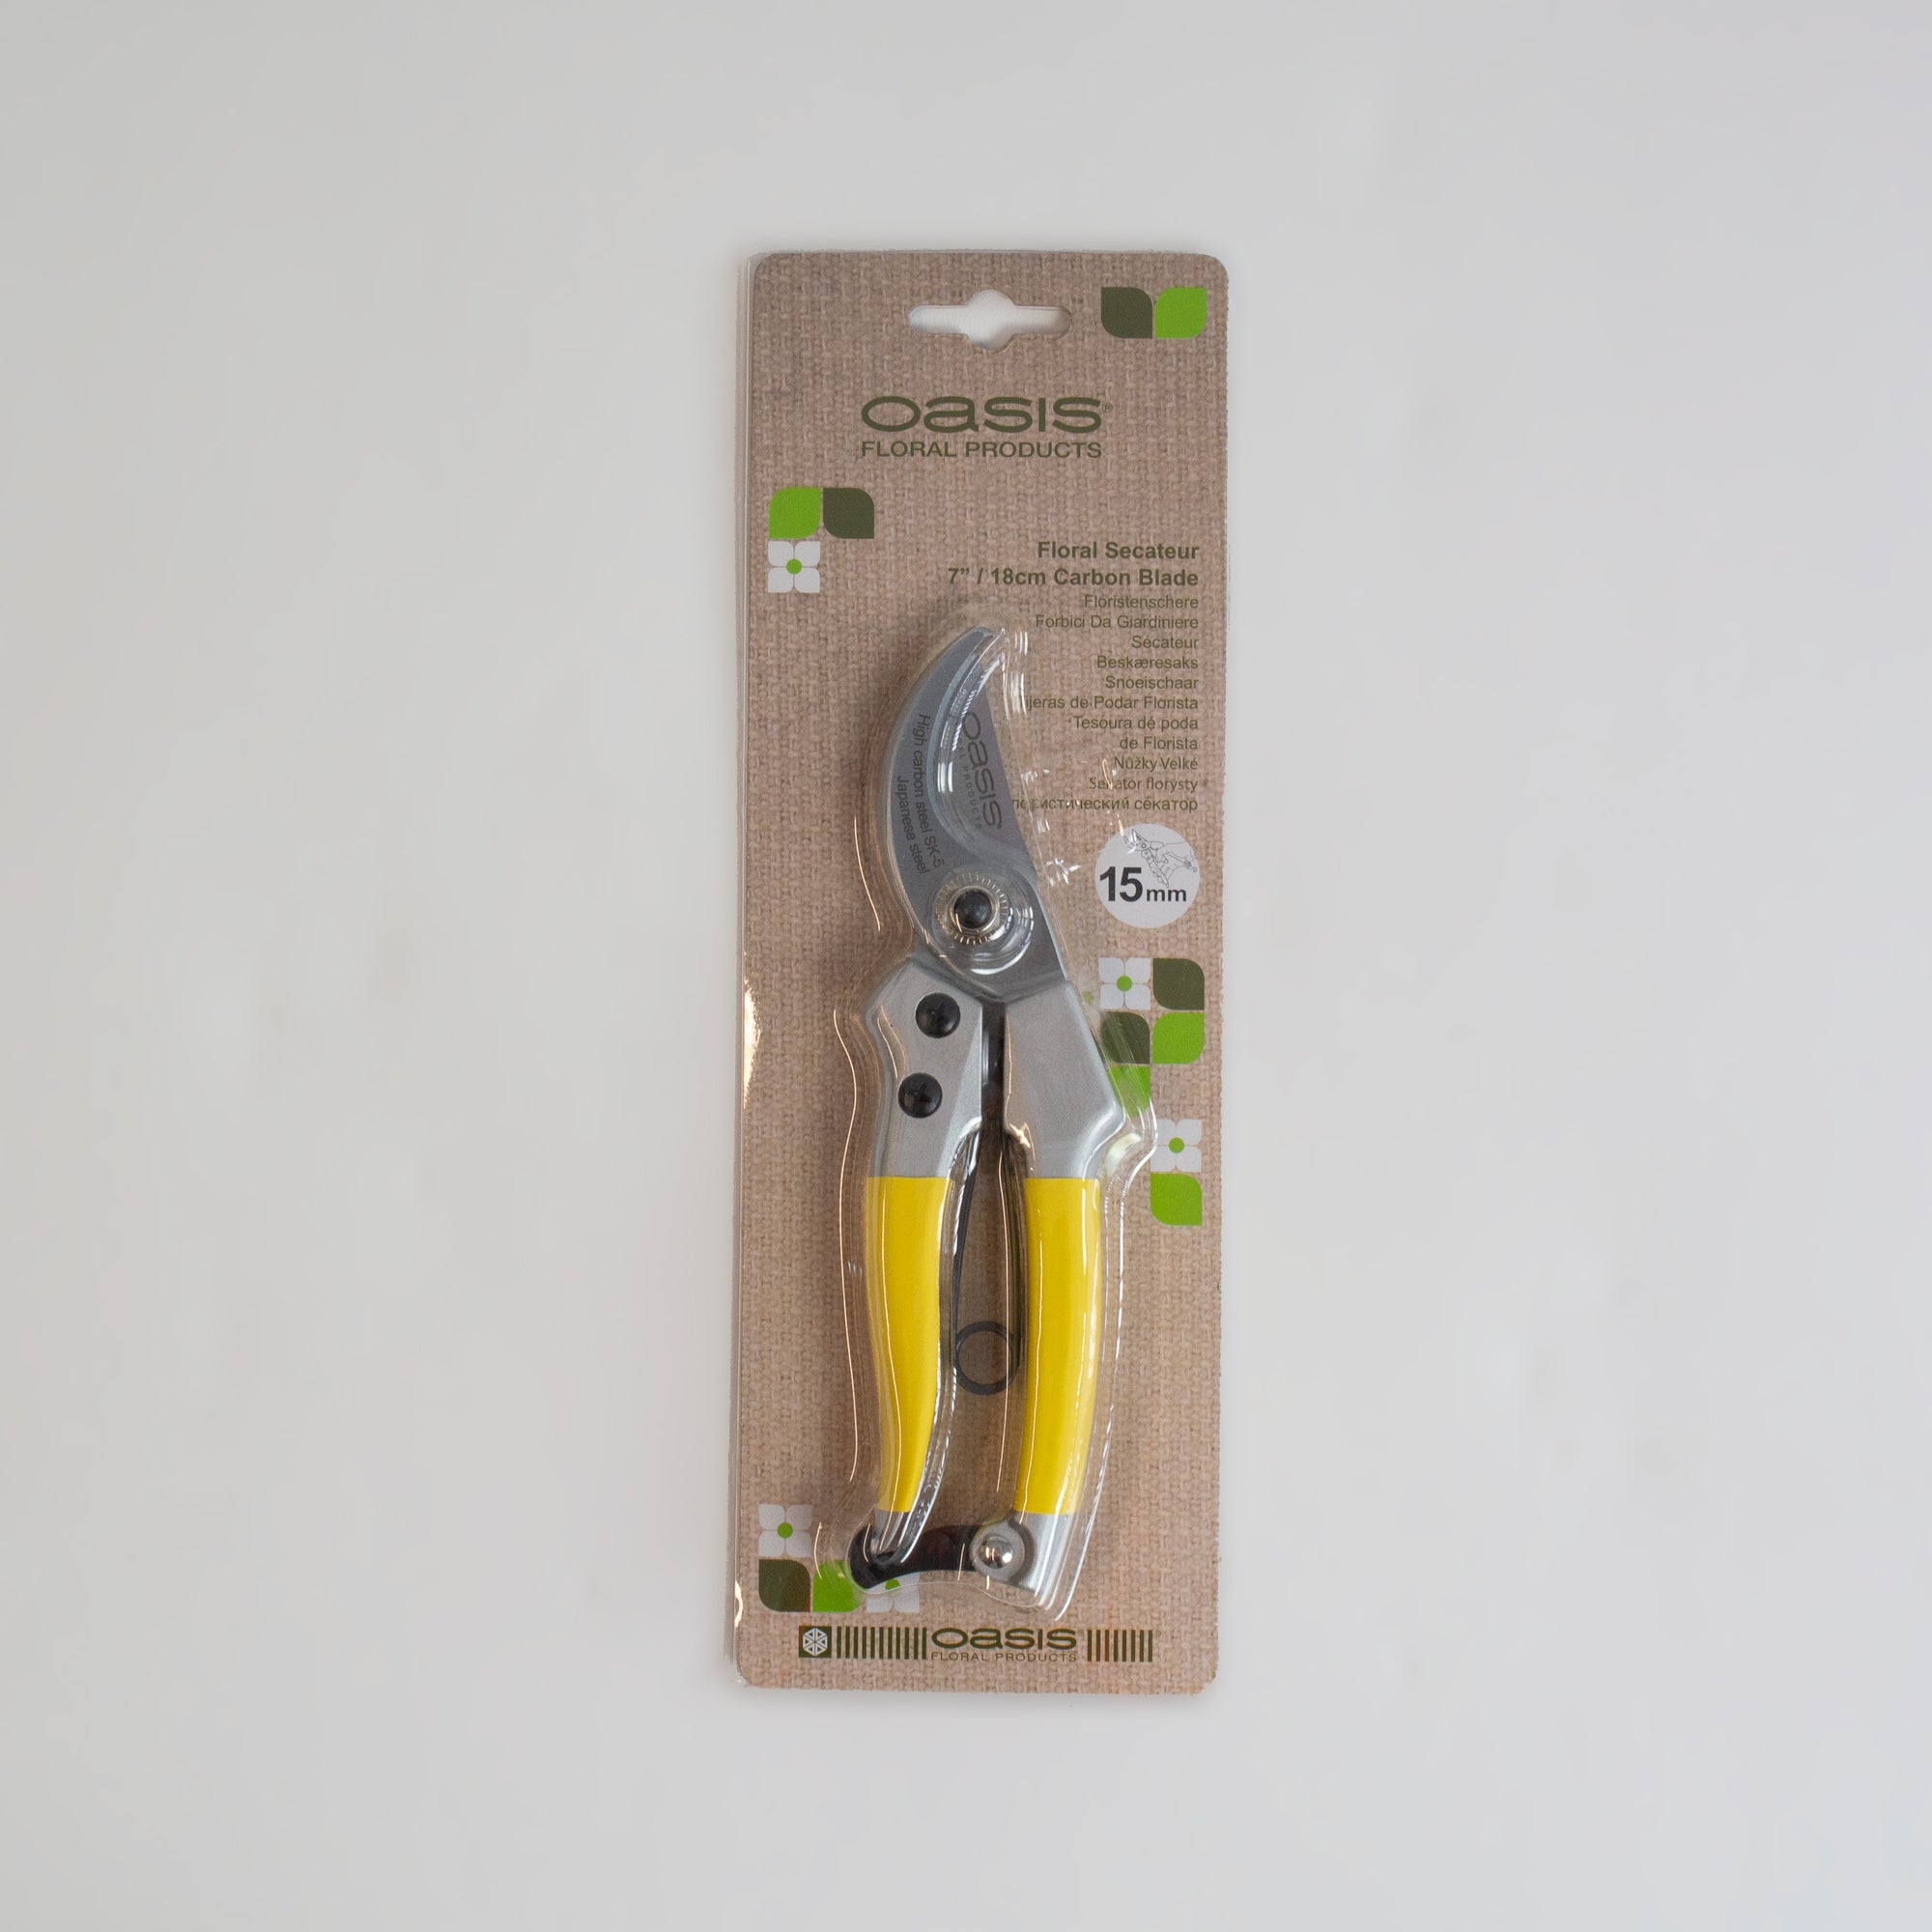 This image shows a set of Carbon Steel Secateurs in packaging, laid on a white background.